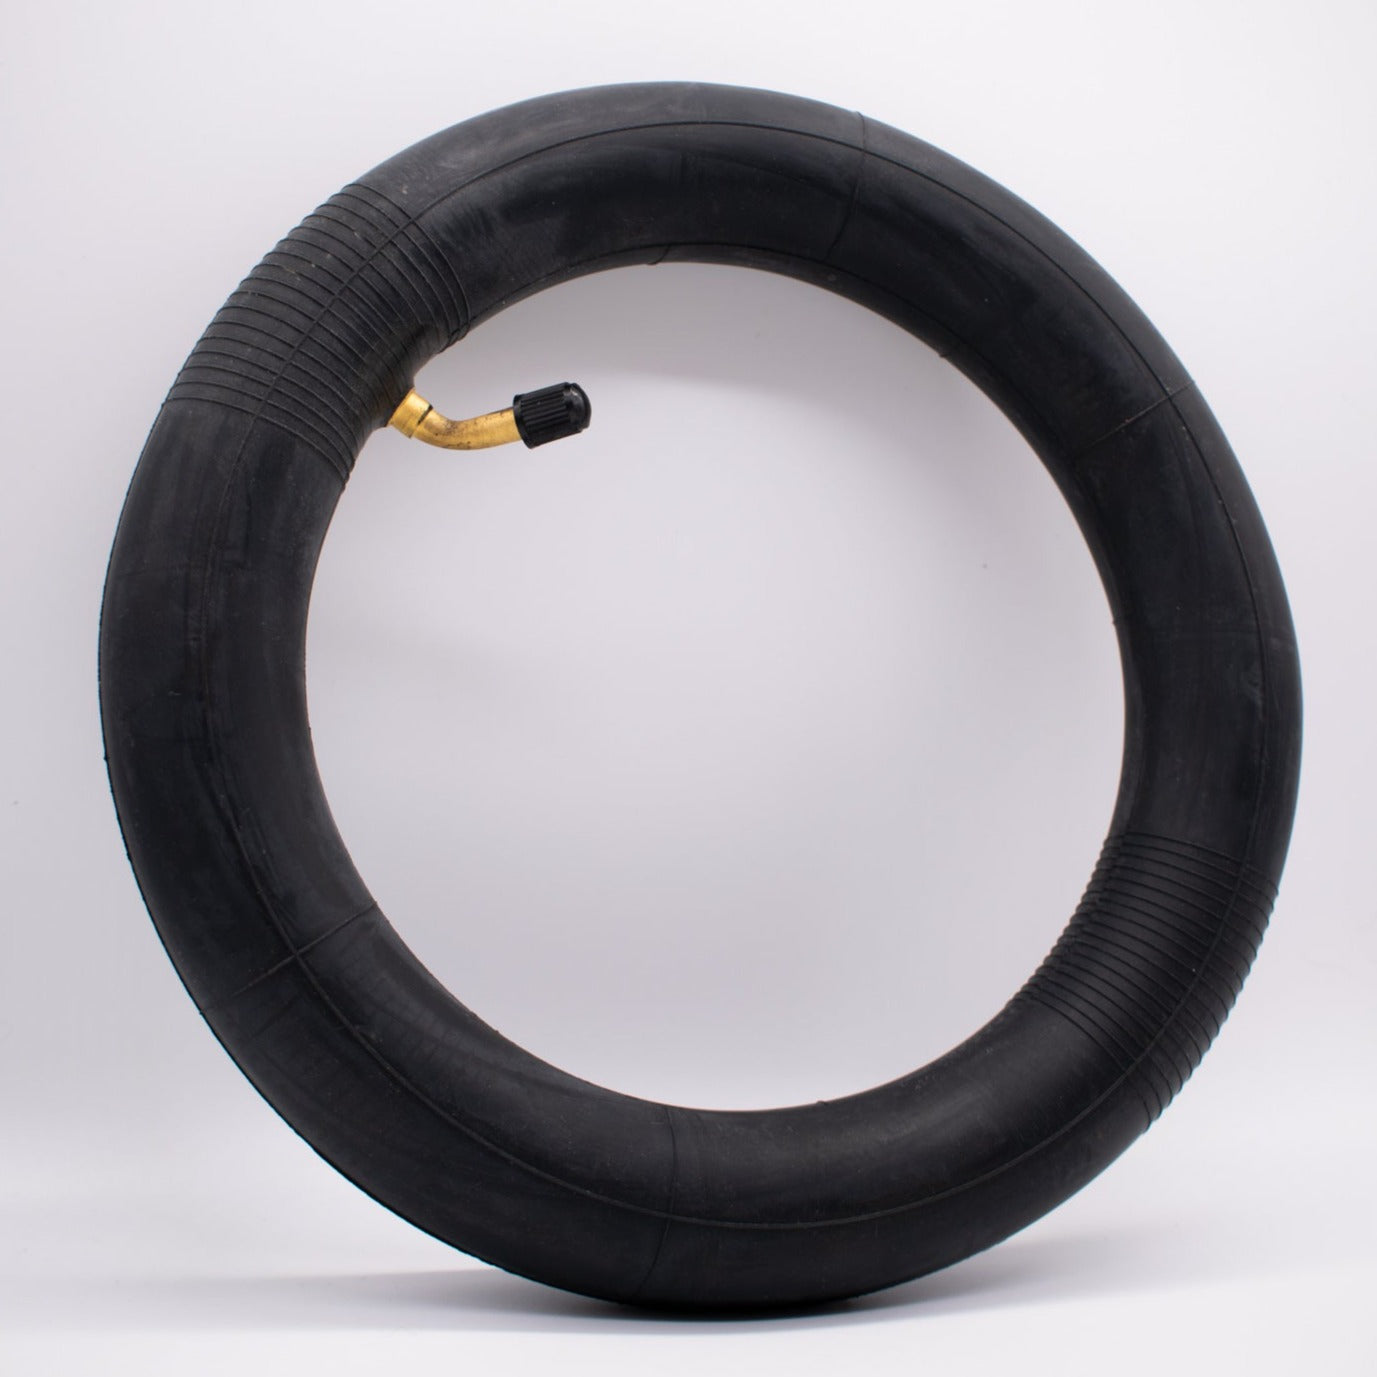 LF 【Ready stock】 10''X2.5'' 10*2.125' Outer Tire+Inner Tube For